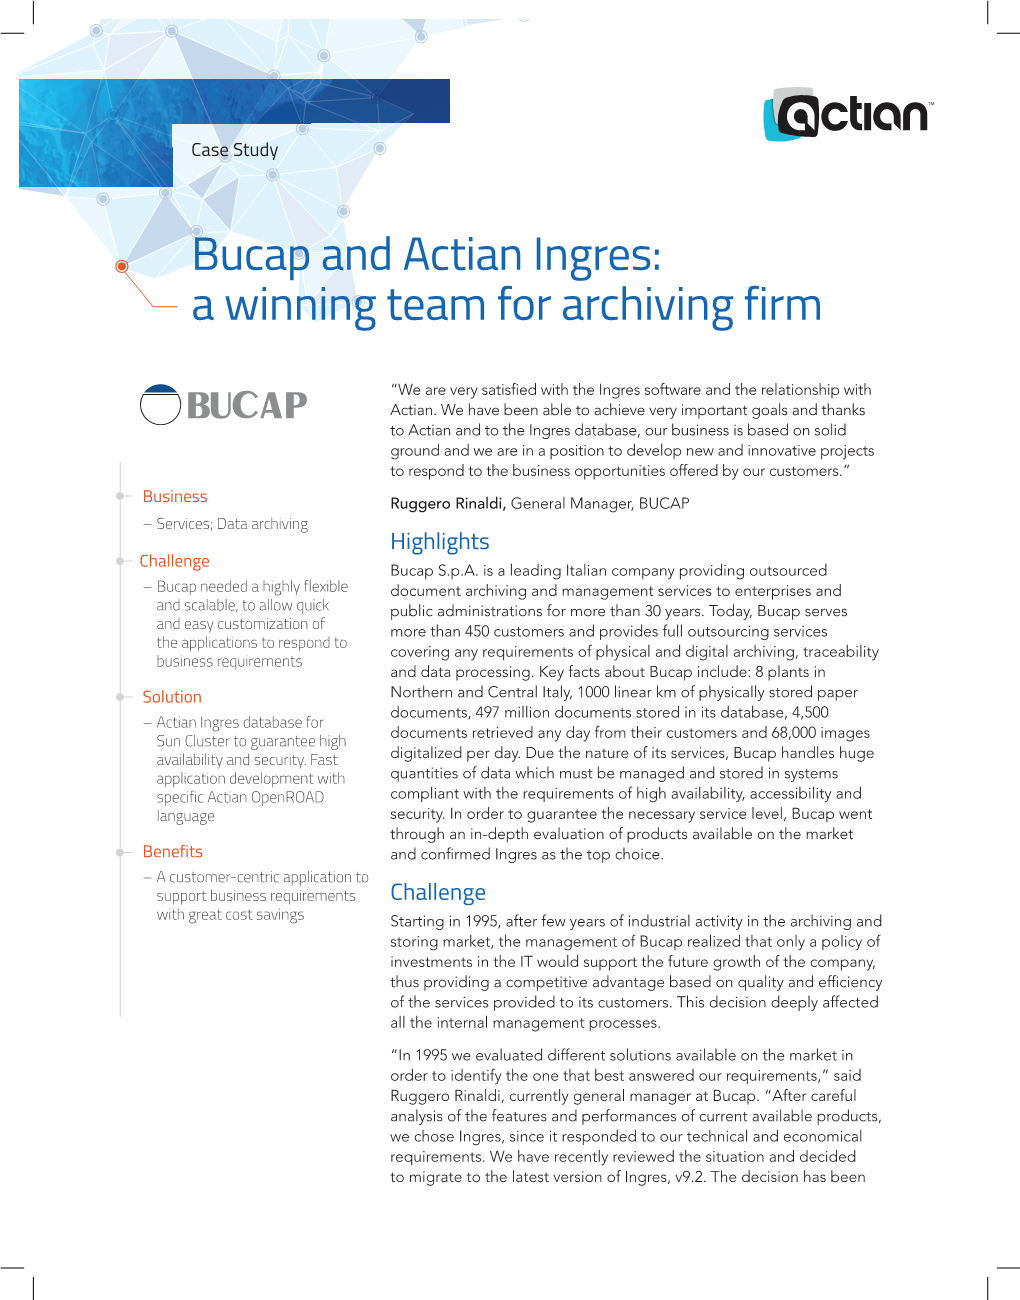 Bucap and Actian Ingres: a Winning Team for Archiving Firm